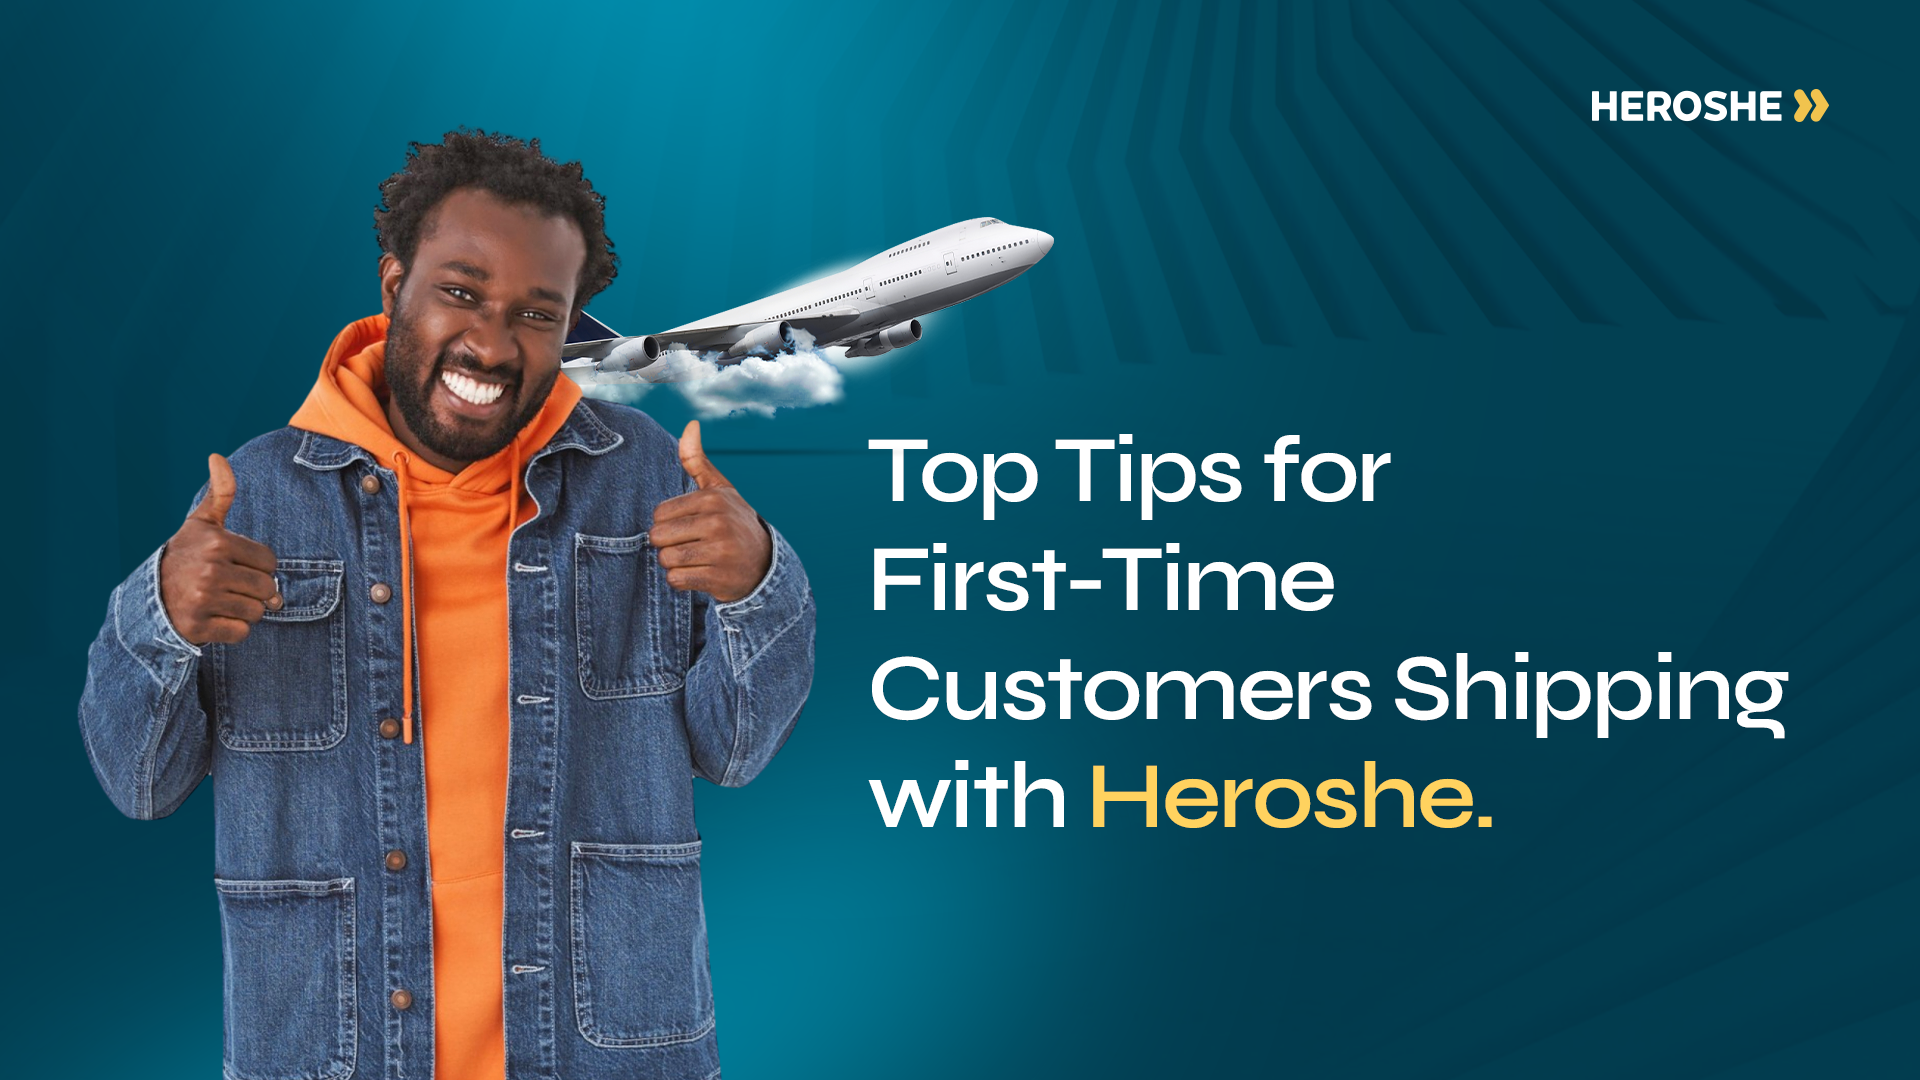 10 Simple Tips For Every Heroshe First-Time Customer Will Benefit From